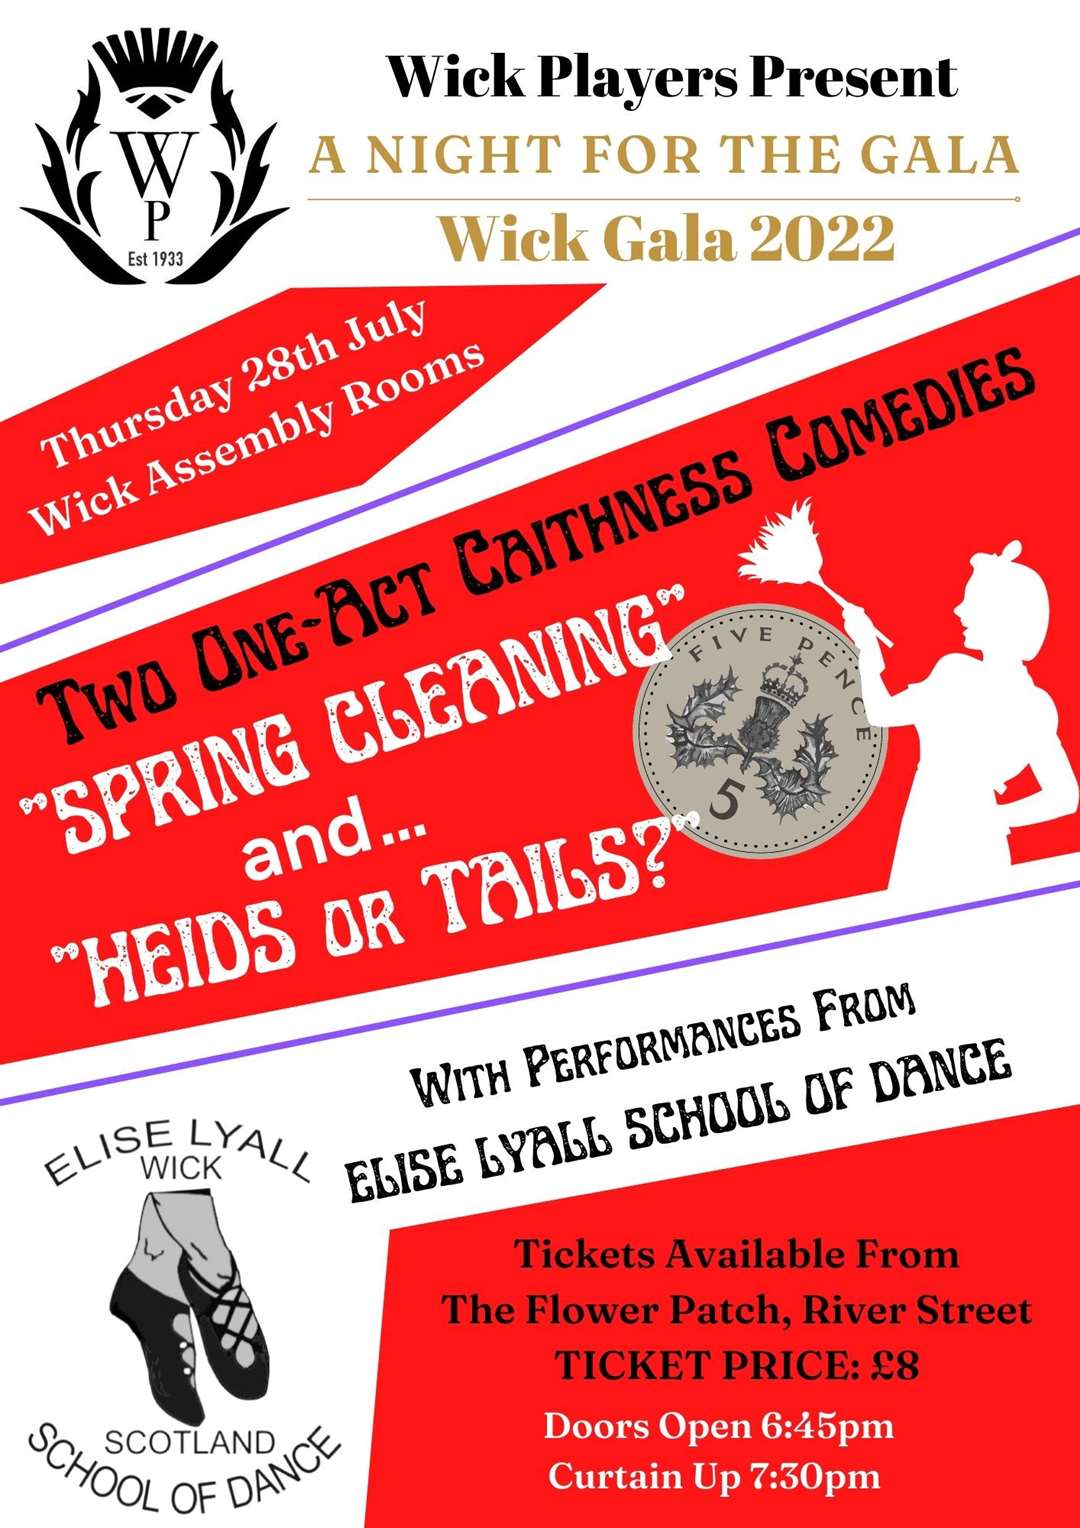 Two Caithness plays – Spring Cleaning and Heids or Tails? – will be performed by Wick Players during gala week.